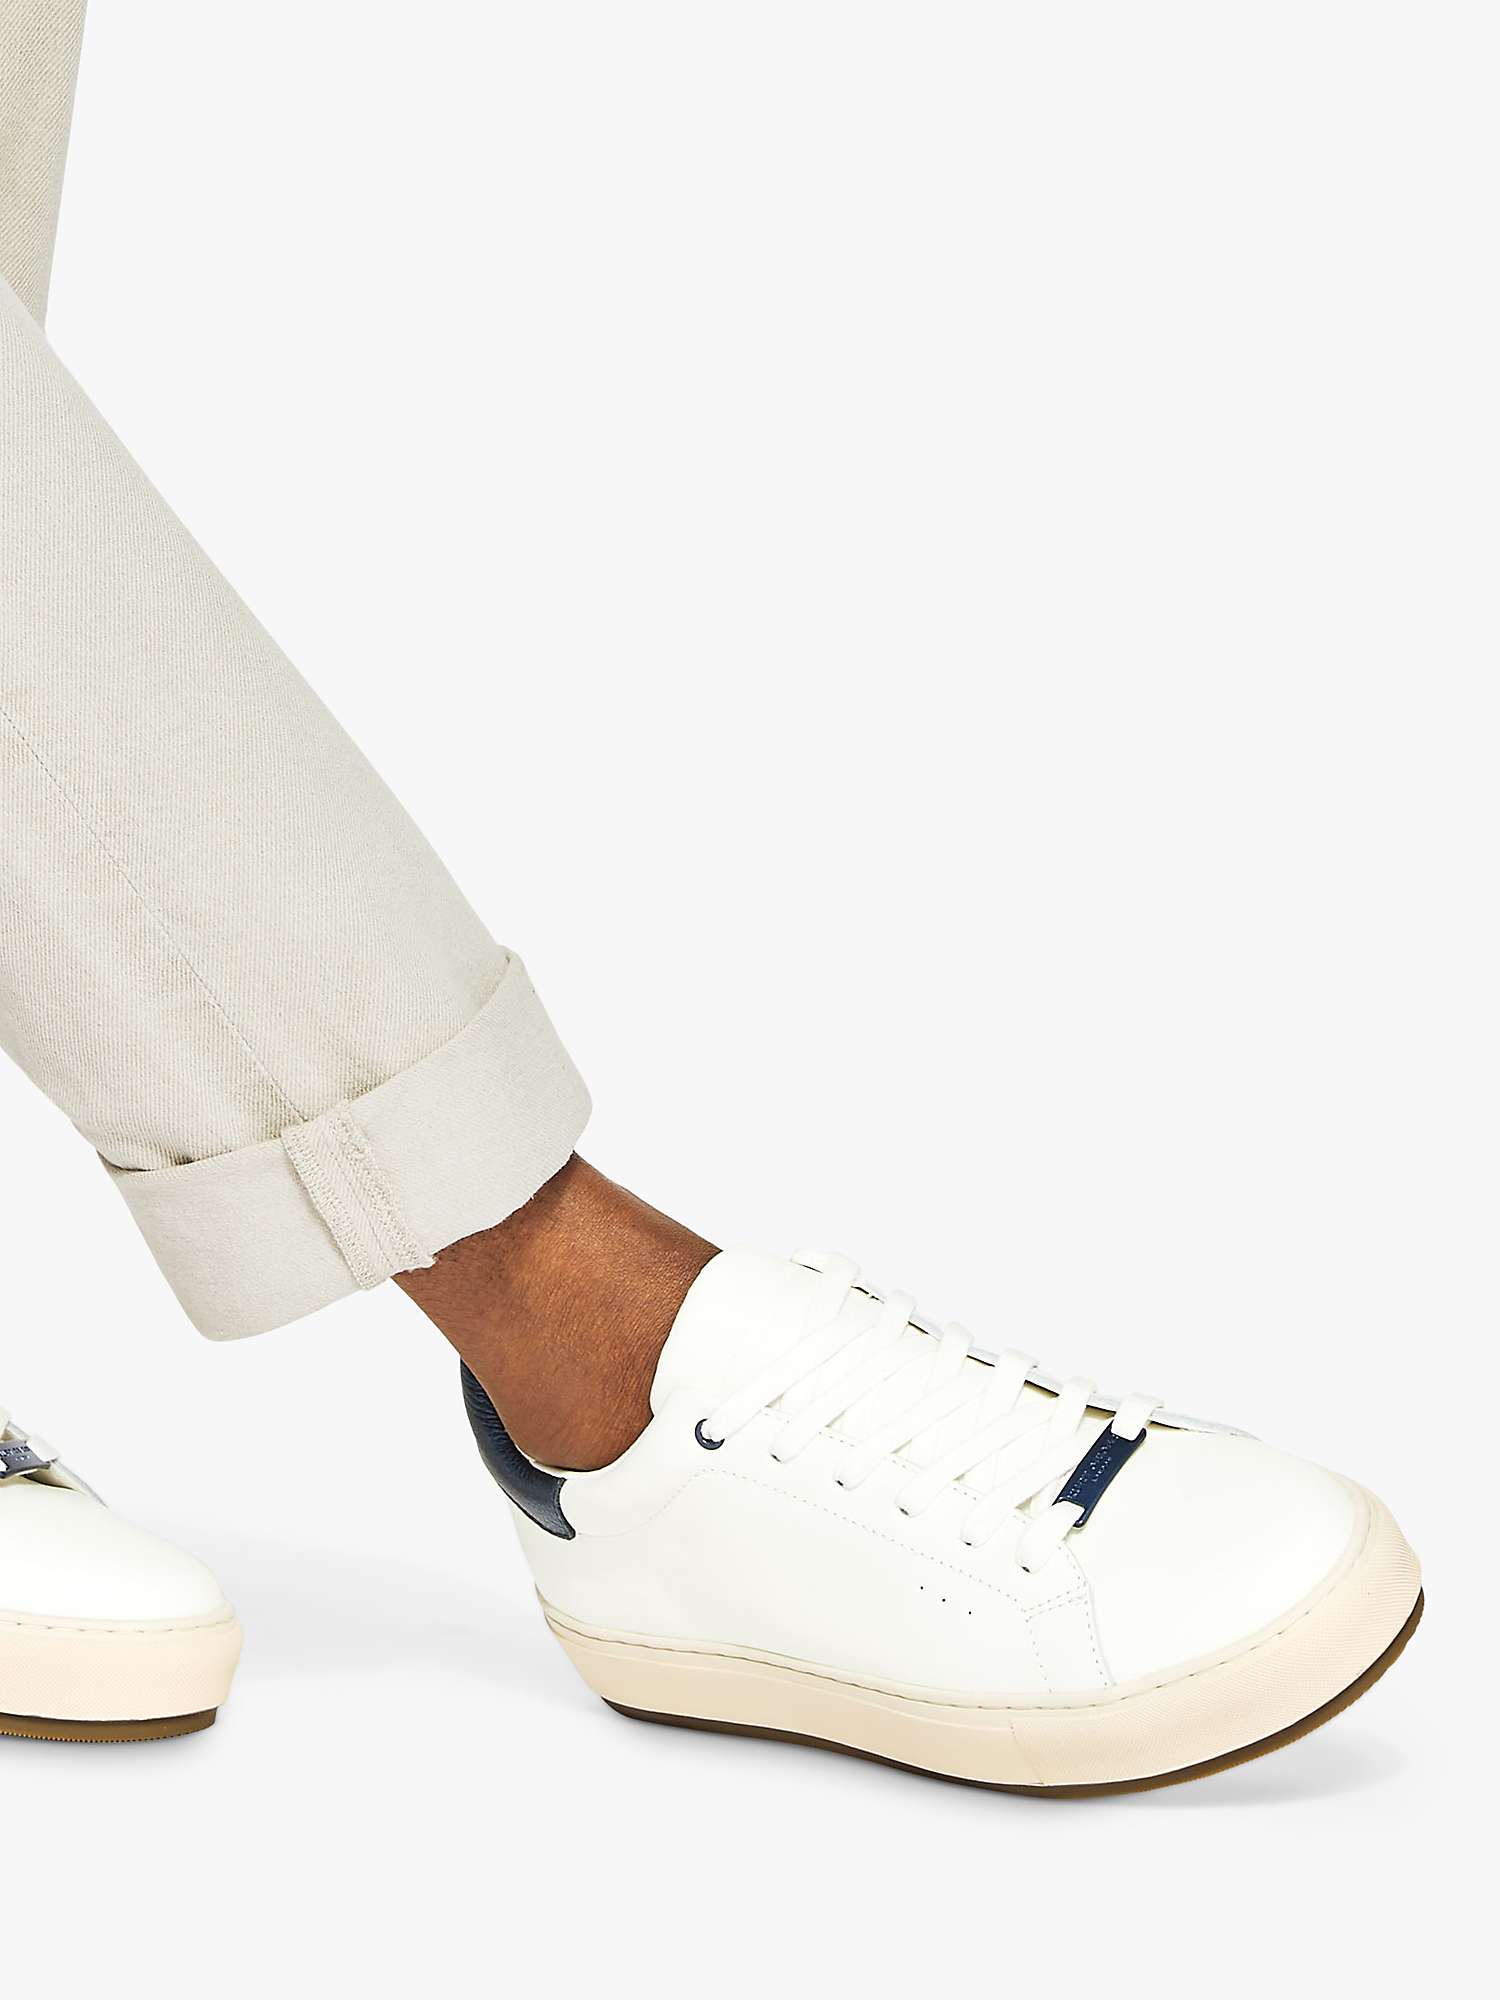 Buy Kurt Geiger London Laney 3 Leather Trainers, White/Multi Online at johnlewis.com